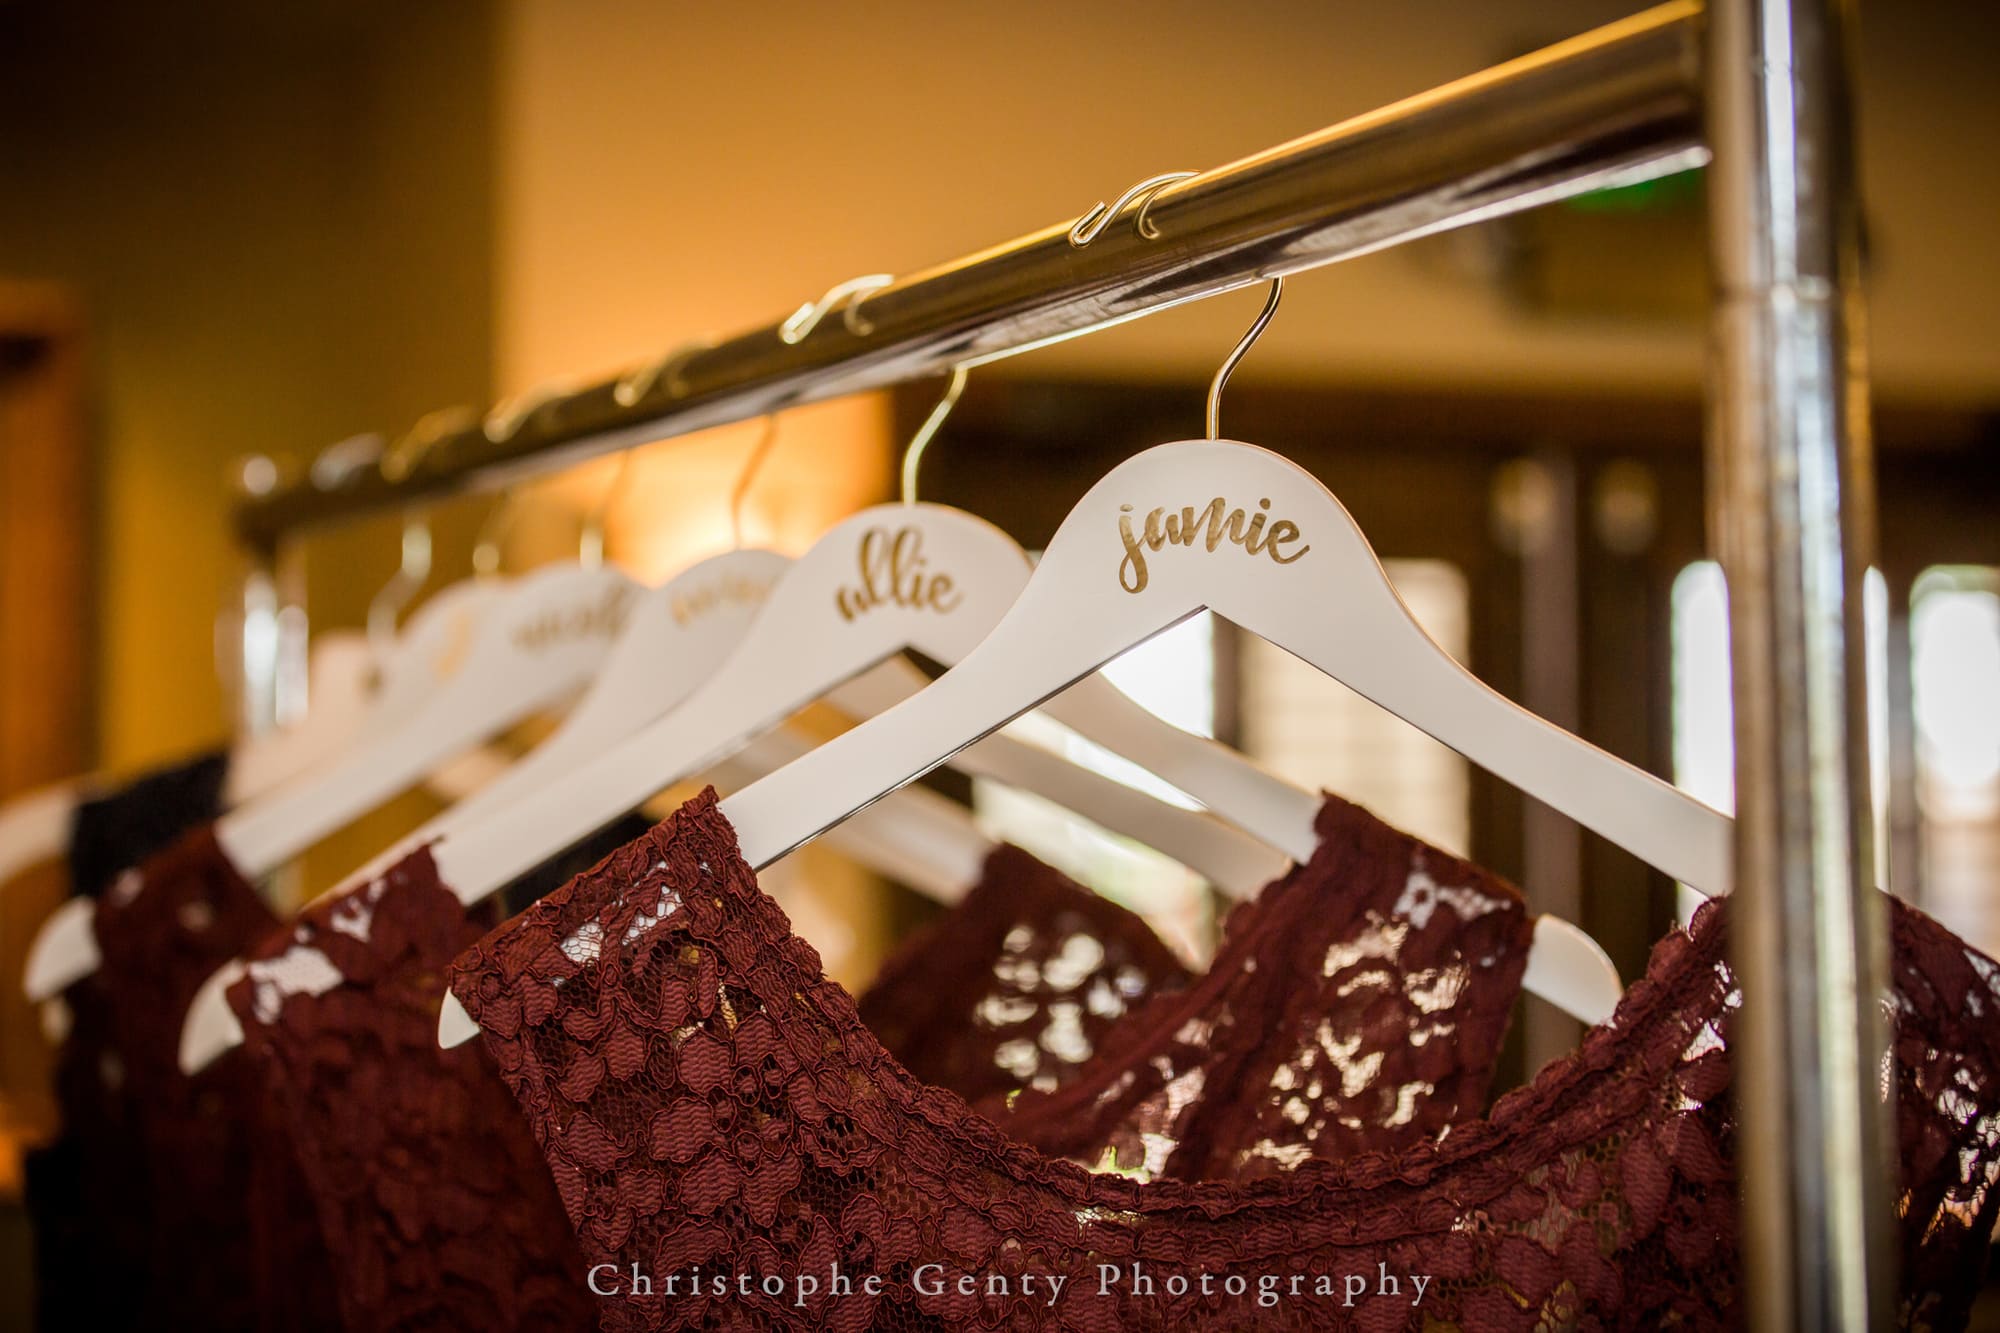 Wedding Photography at The Villagio Inn in Yountville, CA